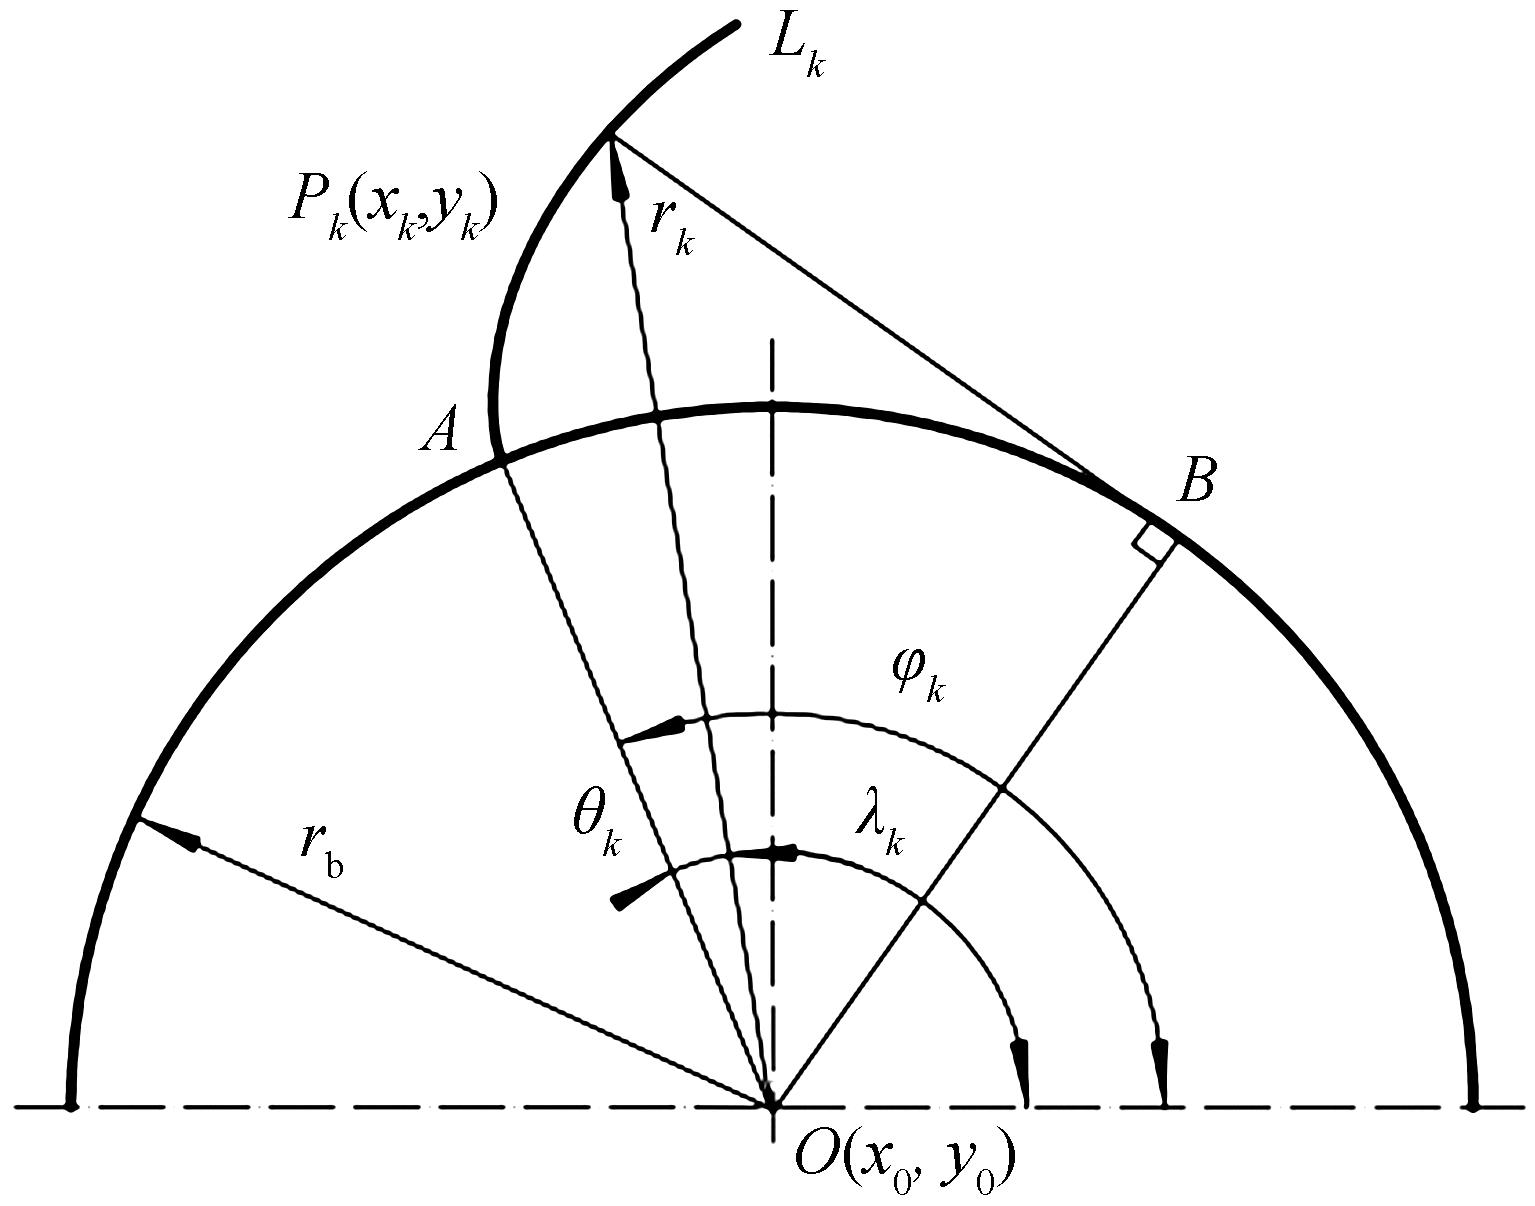 Geometric relationship of points on the involute